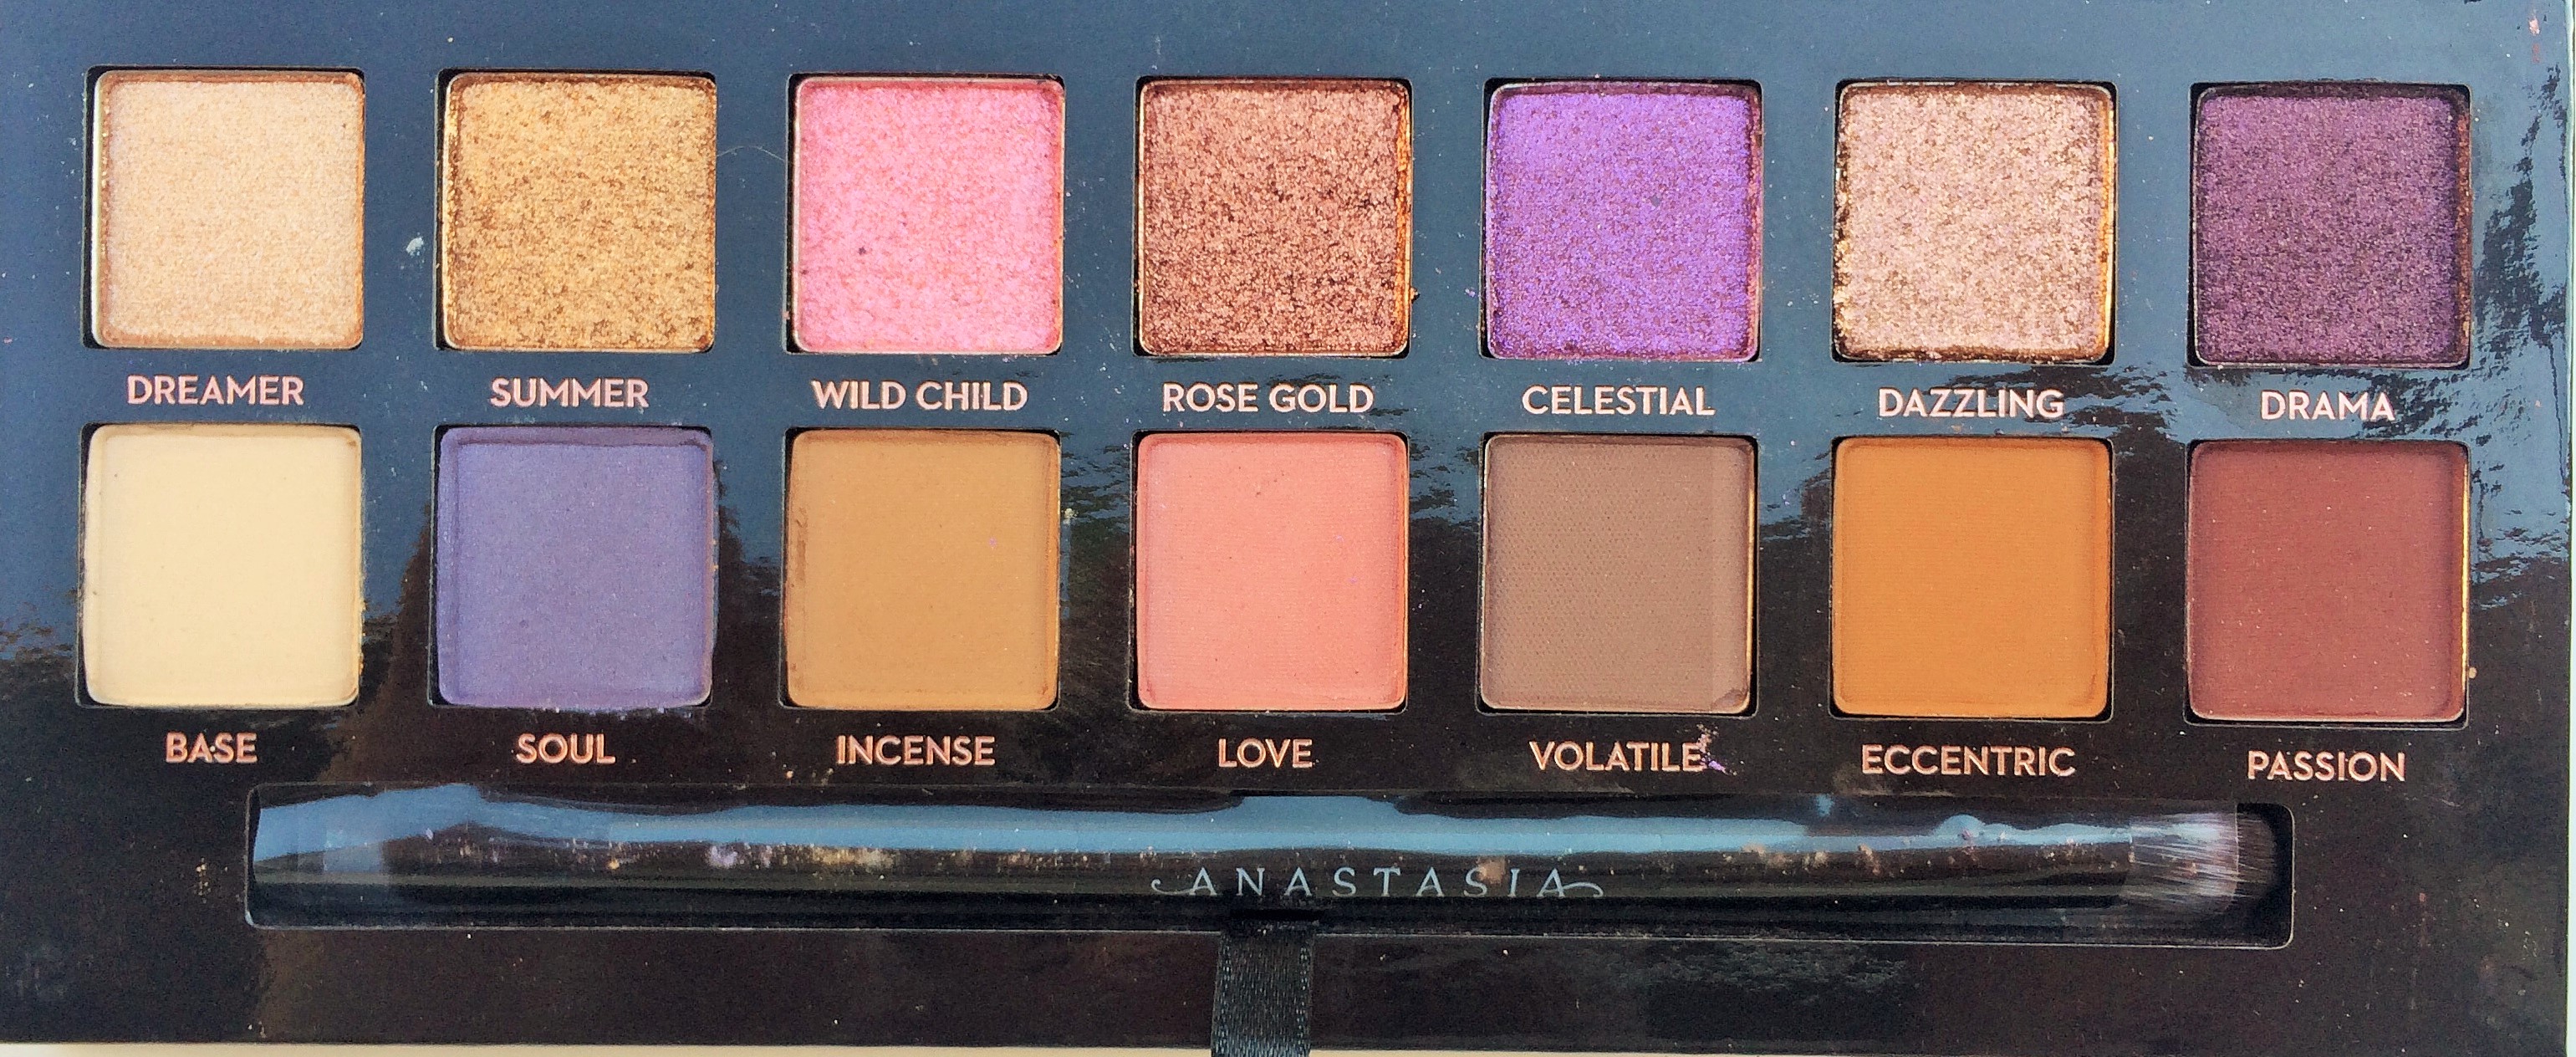 Review Anastasia Beverly Hills Norvina Palette (7)